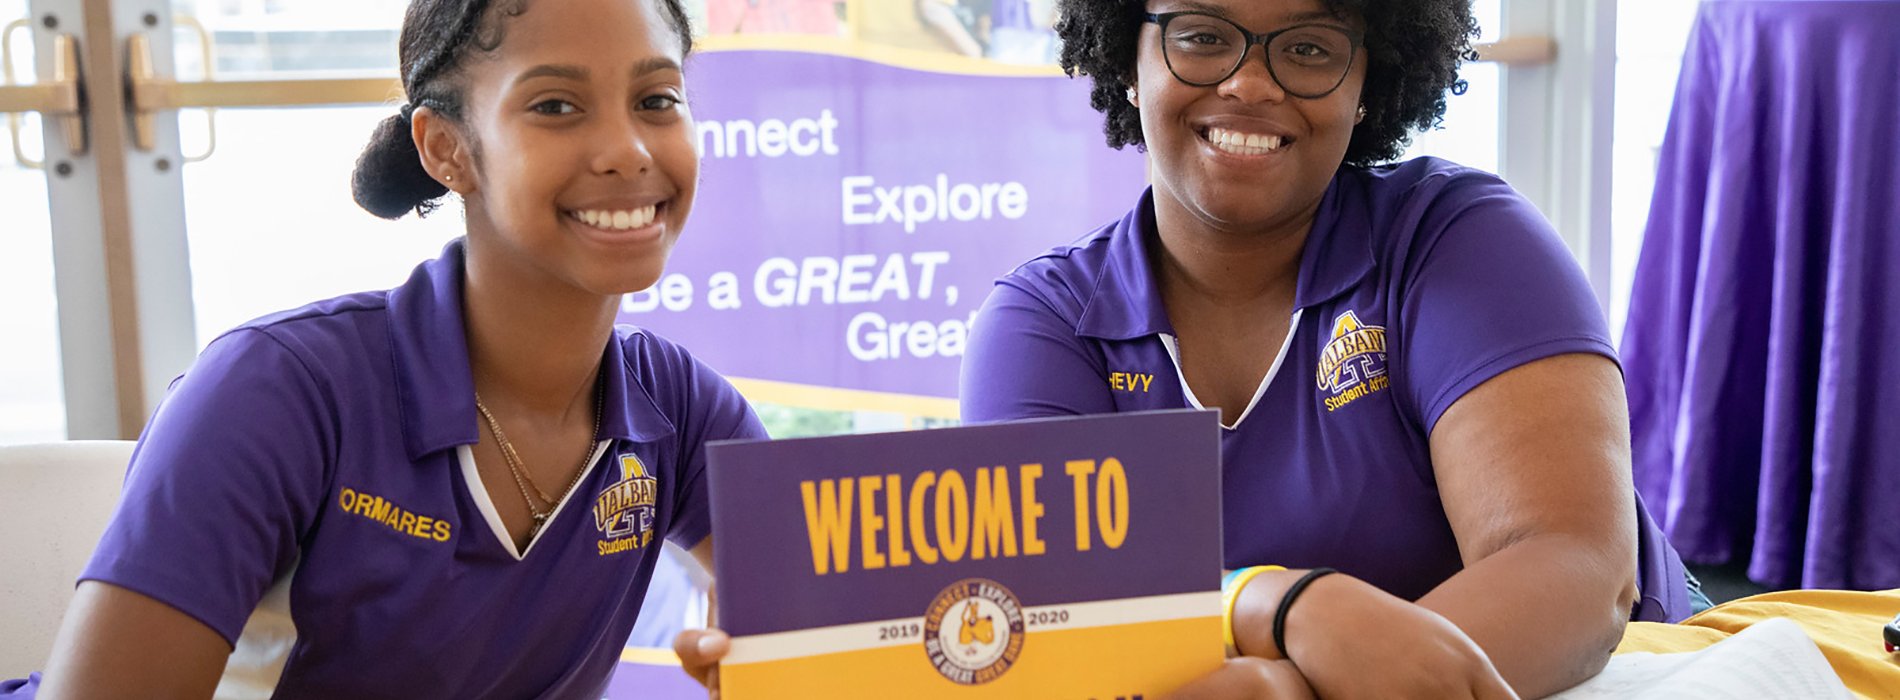 Two Orientation Leaders pose for a photo at a welcome desk, while holding a "Welcome to Orientation" sign.